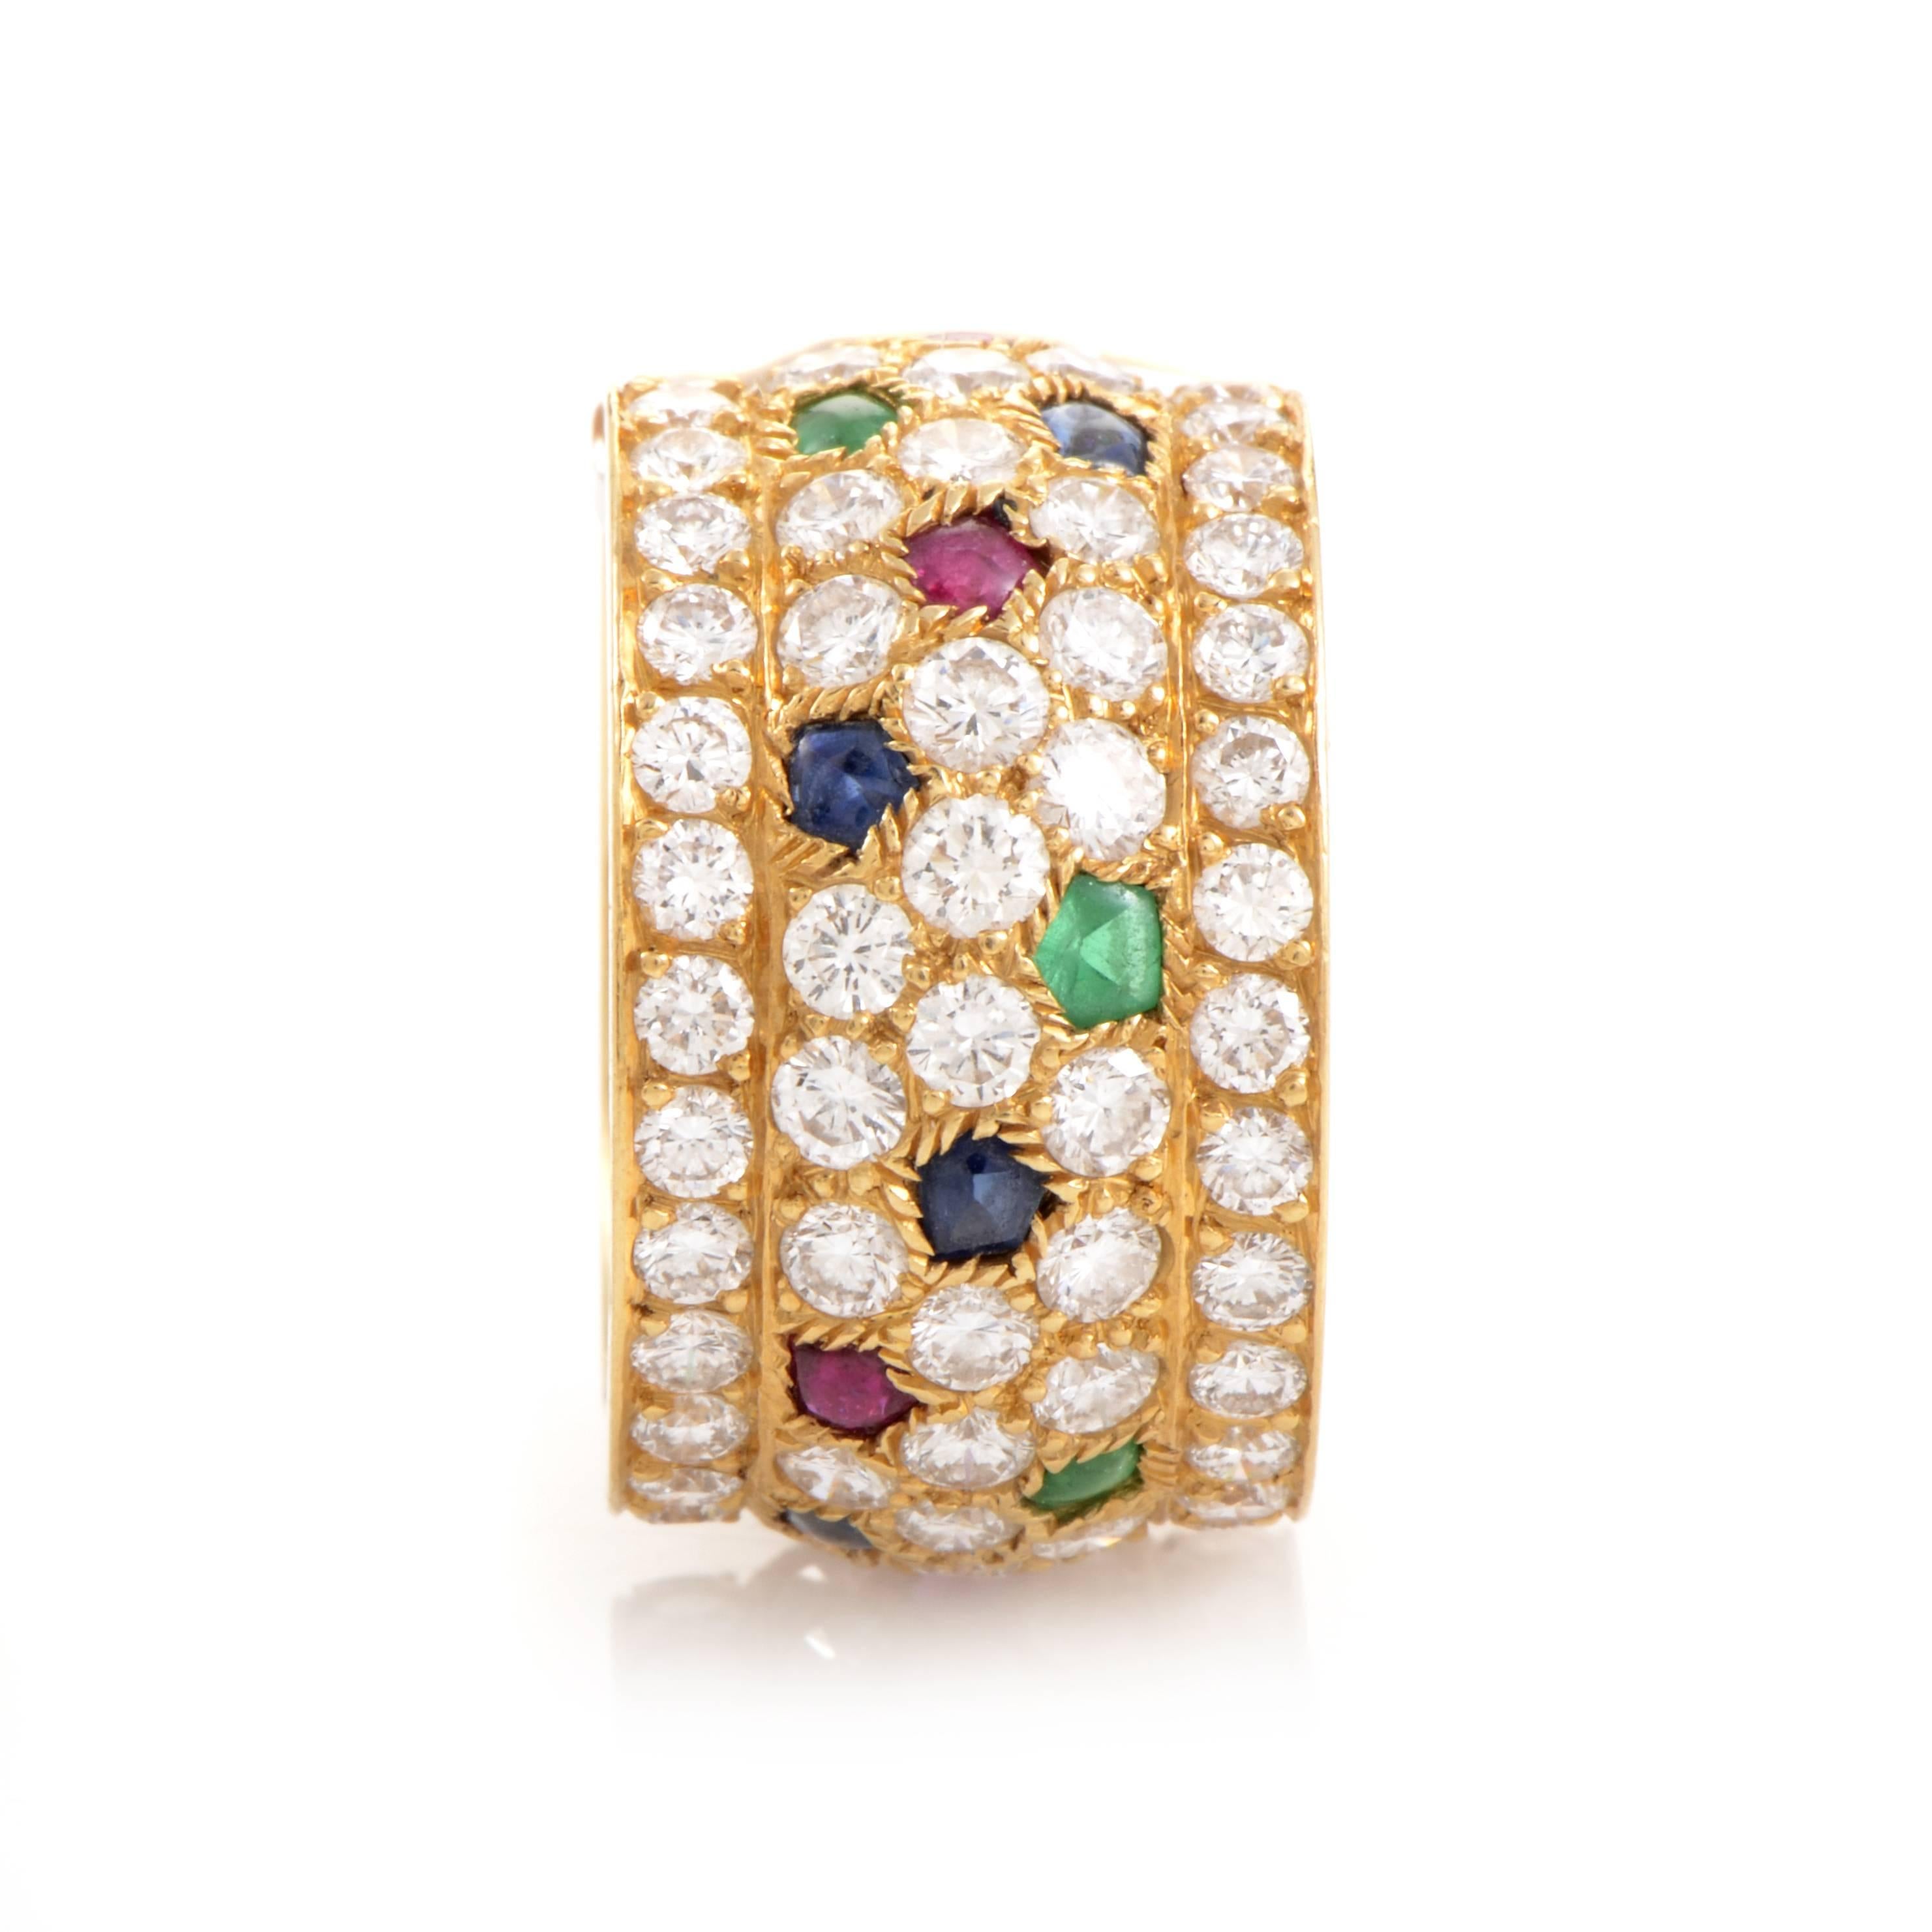 The brilliance of Cartier design makes a kaleidoscopic showcase in this stunning ring. The wide expanse of its 18K yellow Gold band provides plenty of room for sapphires, emeralds and rubies to add vibrant color to a generous tide of 5.00ct